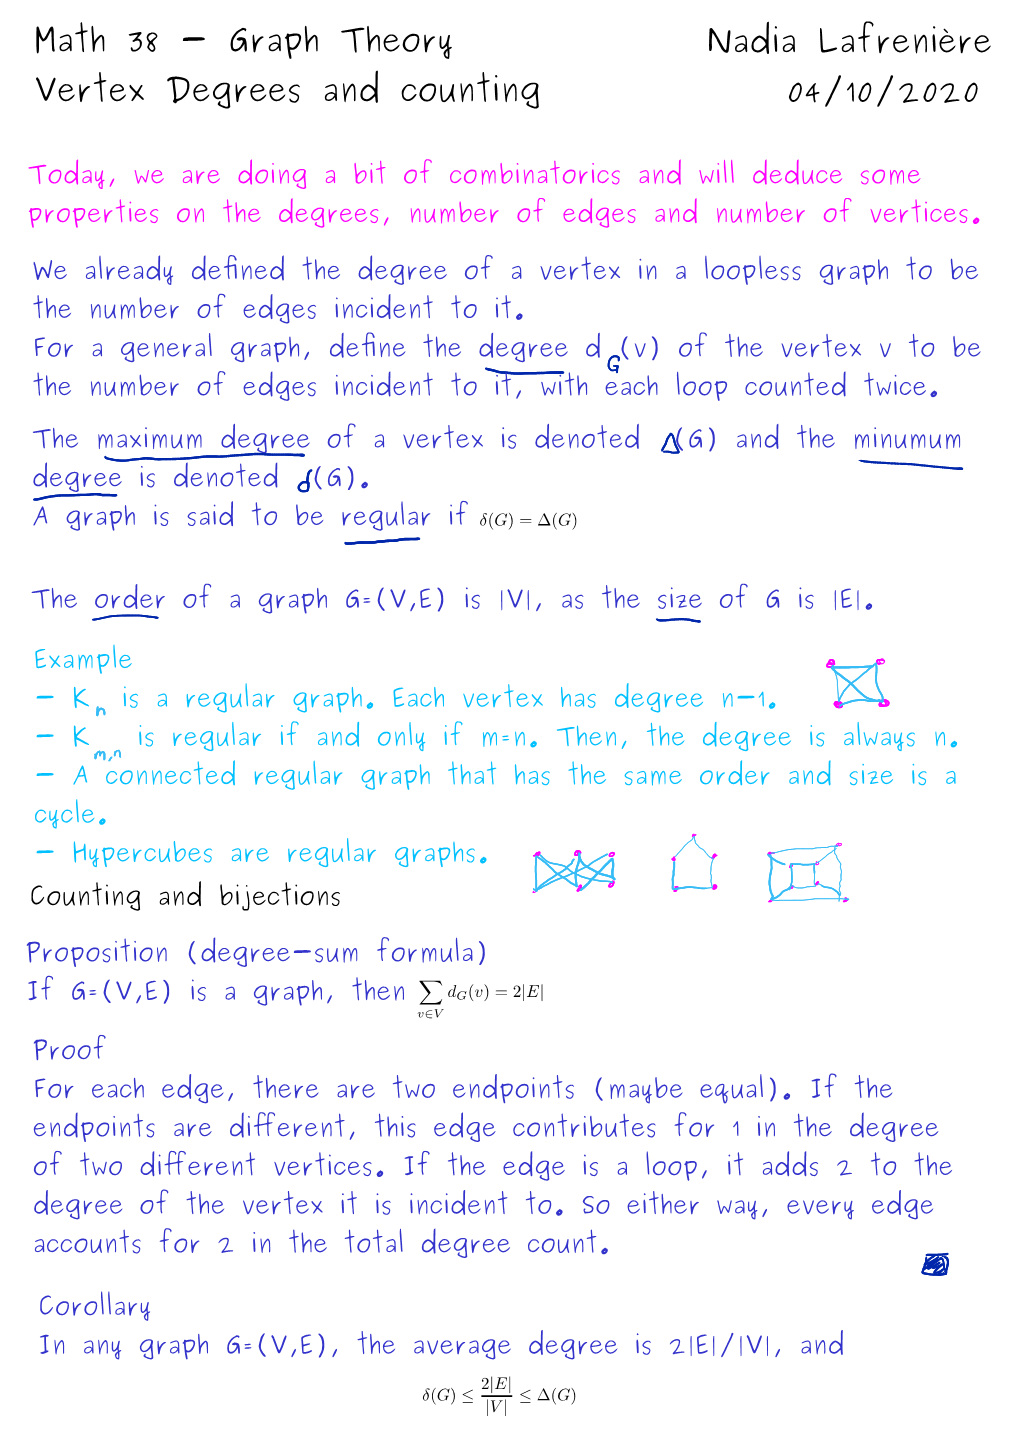 Math 38 - Graph Theory Nadia Lafrenière Vertex Degrees and Counting 04/10/2020